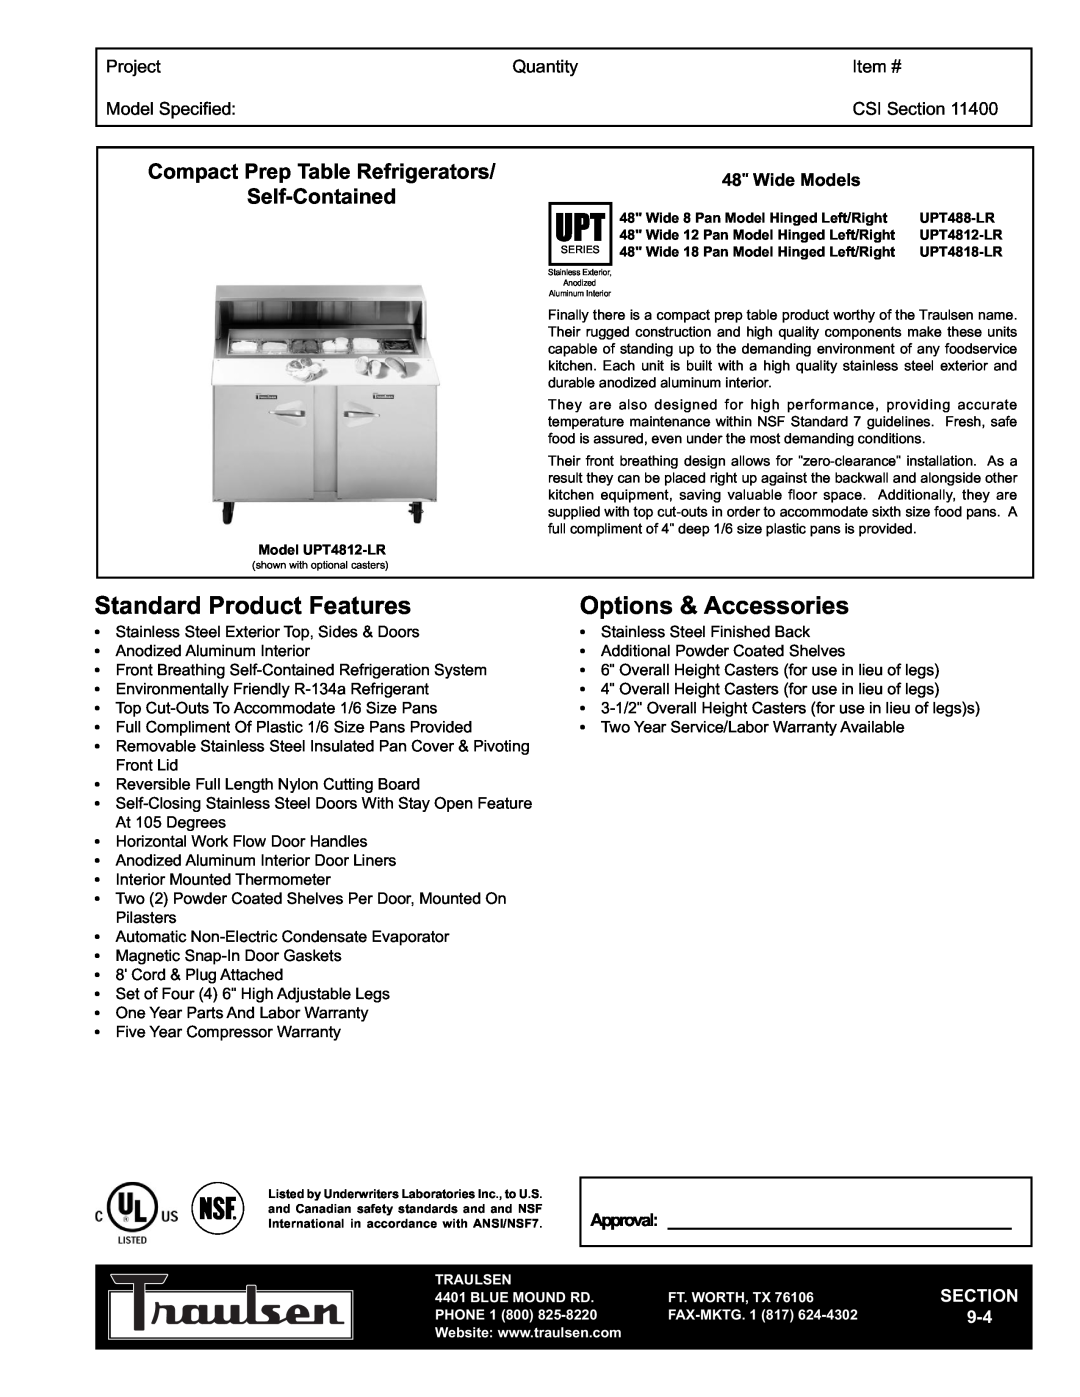 Traulsen UPT4812-LR warranty Compact Prep Table Refrigerators Self-Contained, Project, Quantity, Item #, Model Specified 